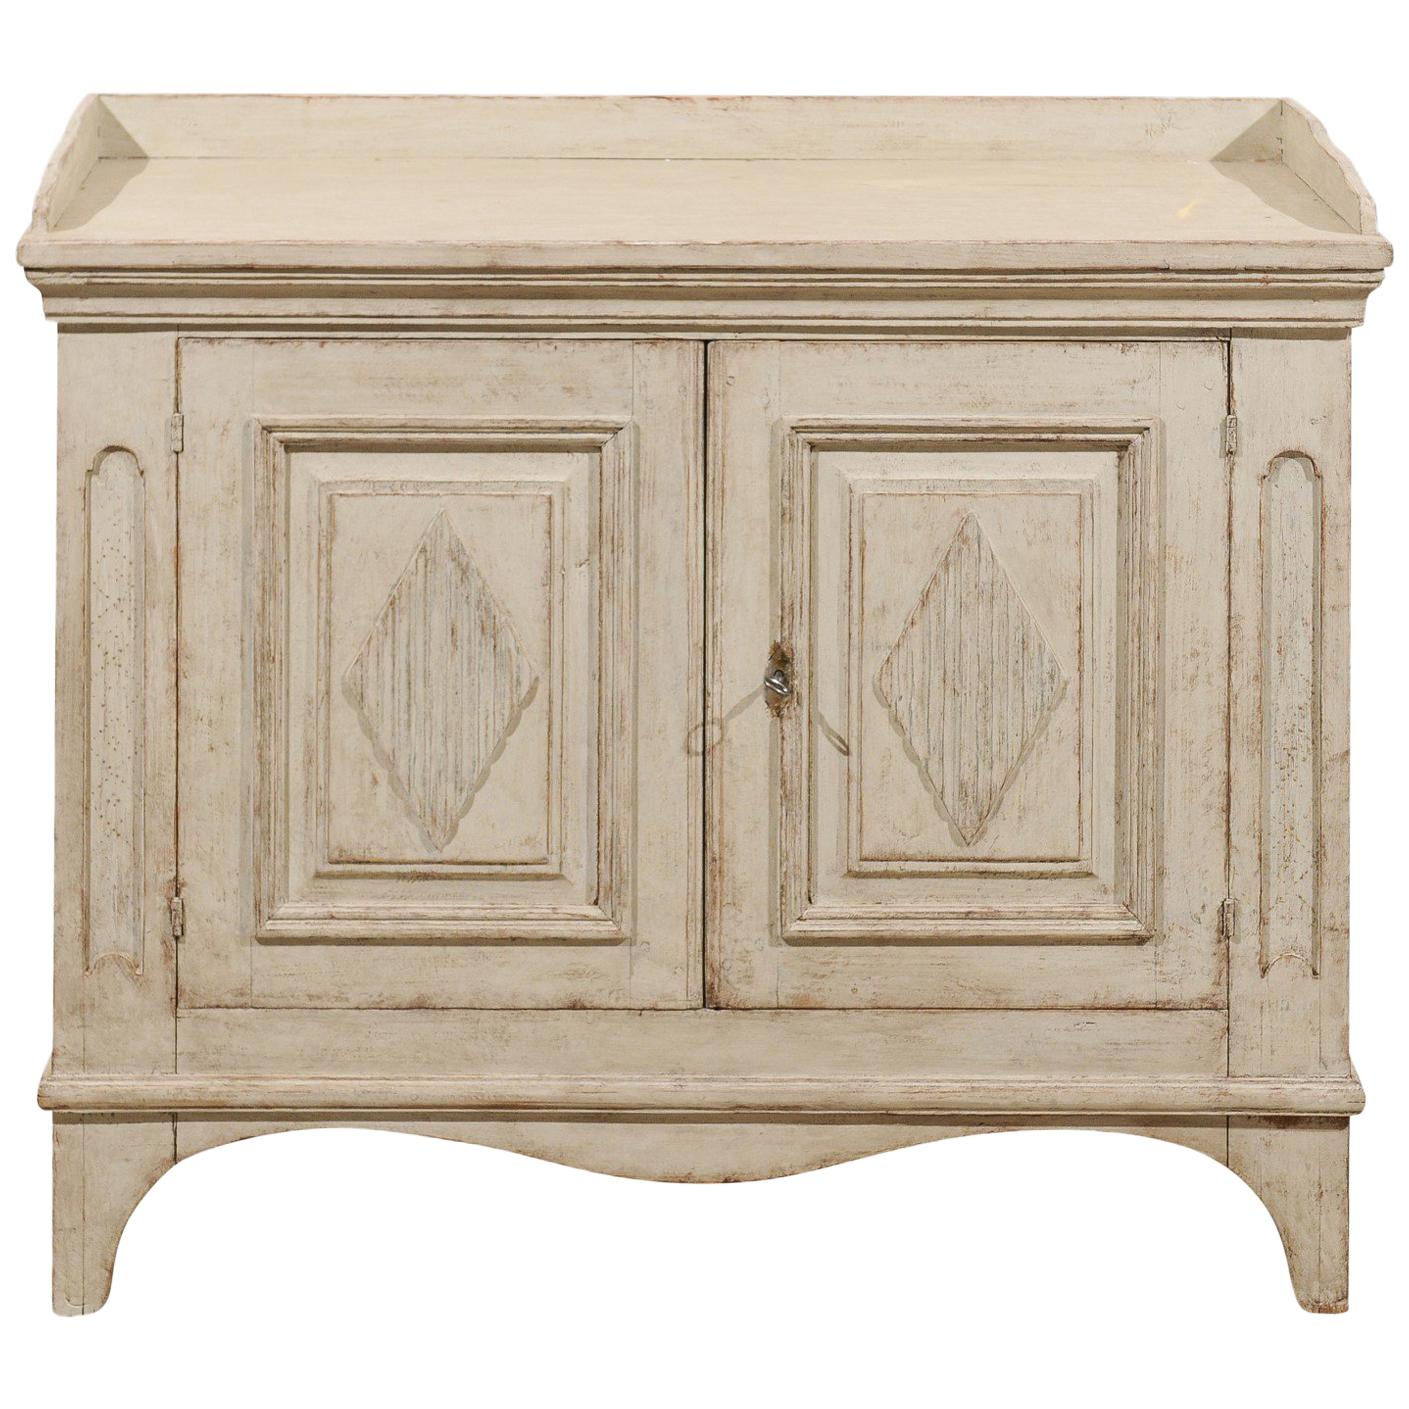 1810s Swedish Period Gustavian Painted Sideboard with Reeded Diamond Motifs